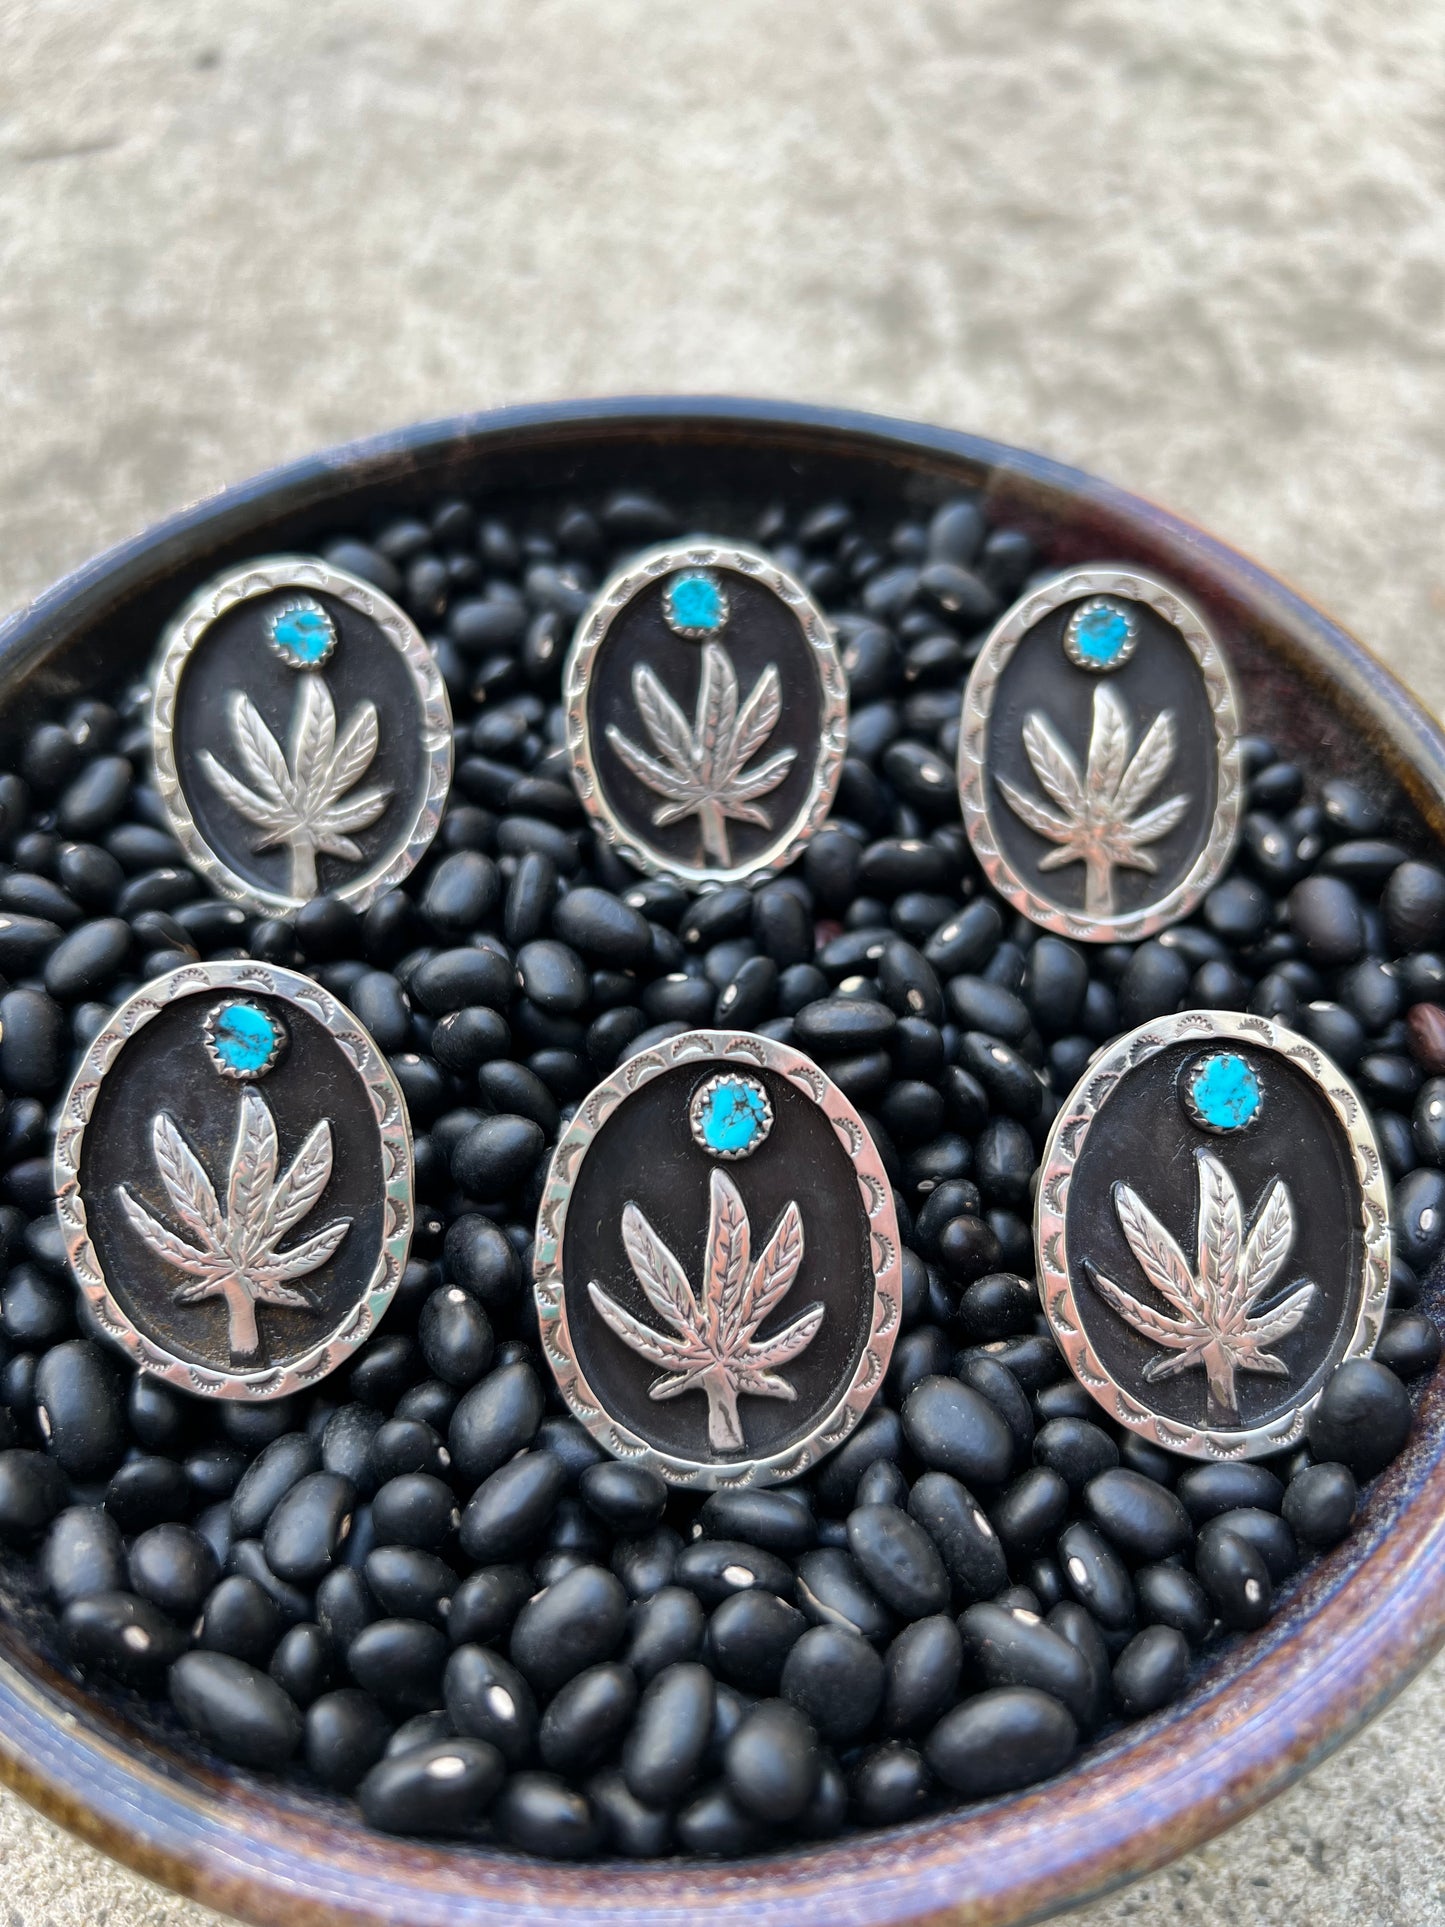 Dope Turquoise Rings